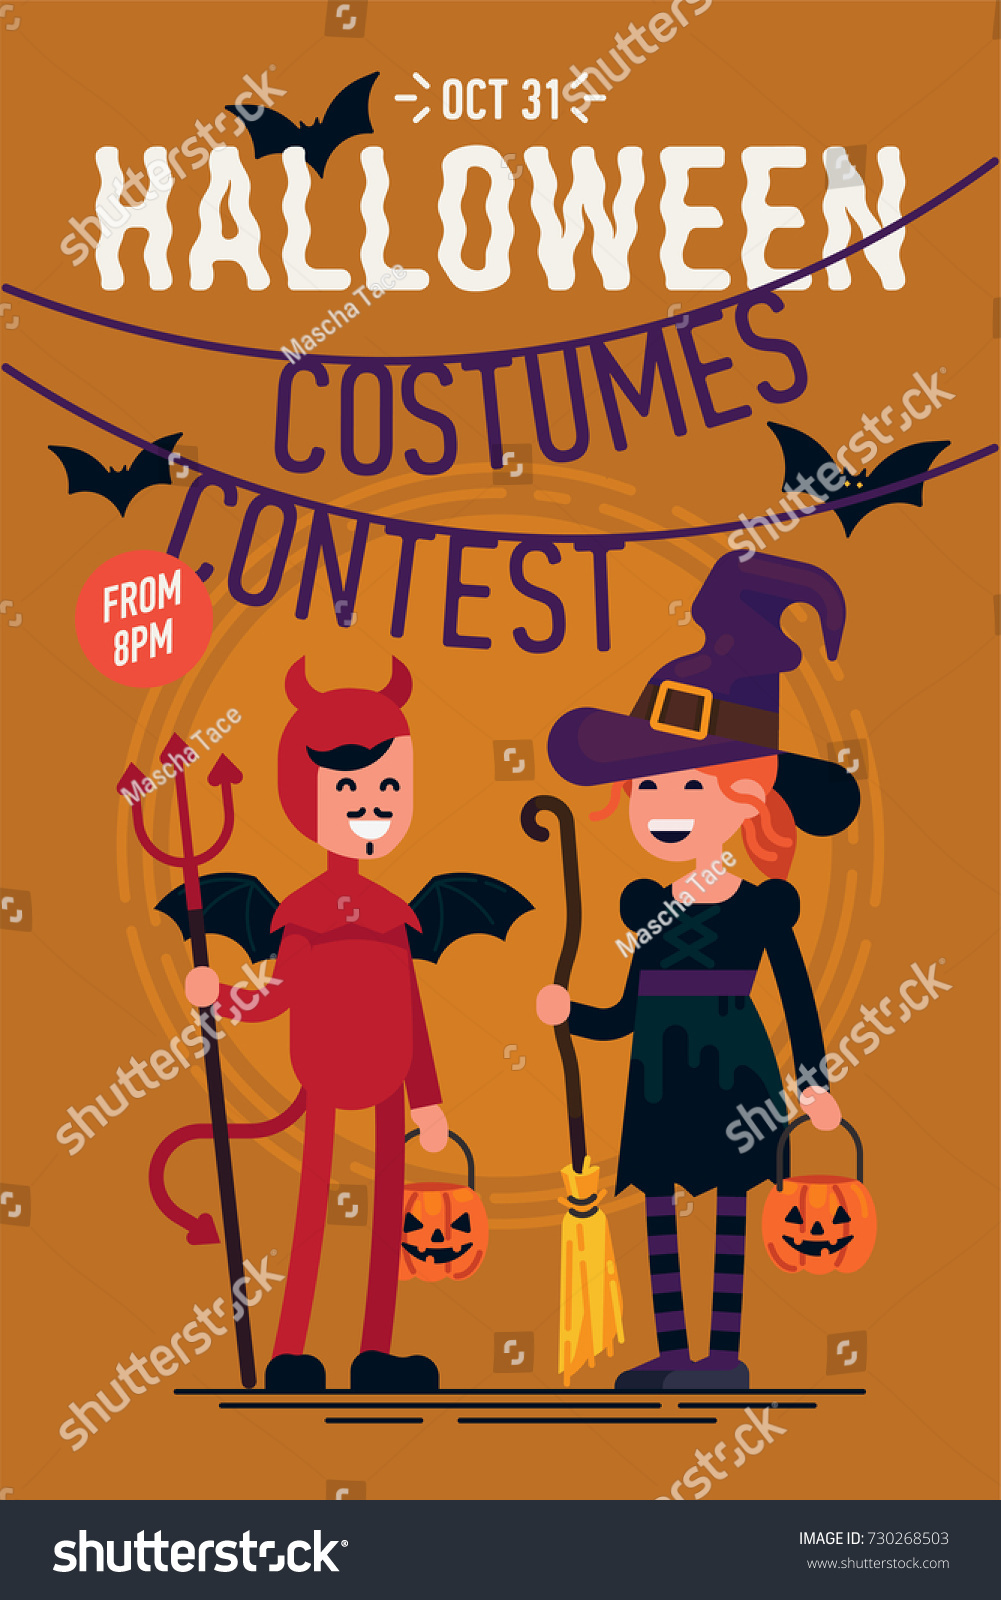 Cool Vector Template On Halloween Costumes Stock Vector (Royalty Within Halloween Costume Party Flyer Templates